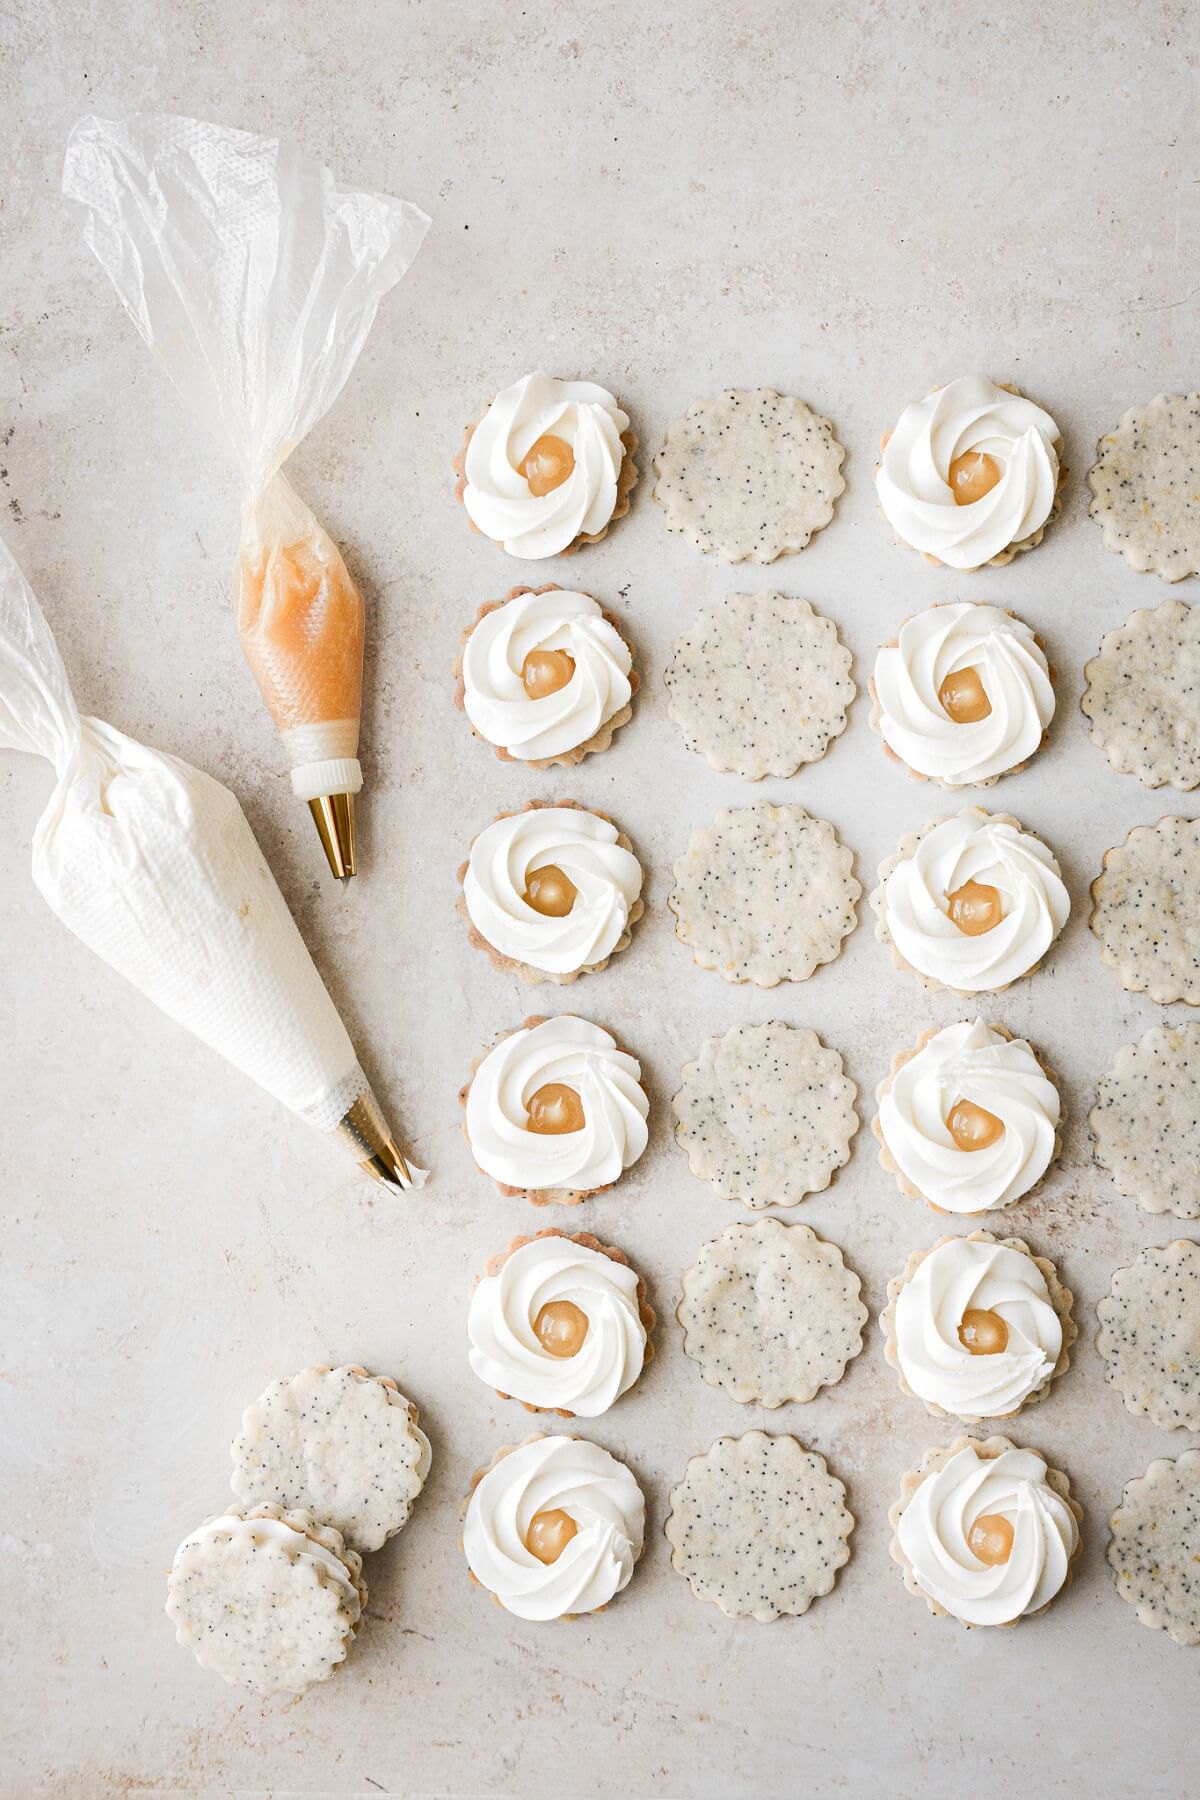 Lemon poppy seed shortbread cookies being filled with lemon buttercream and lemon curd.